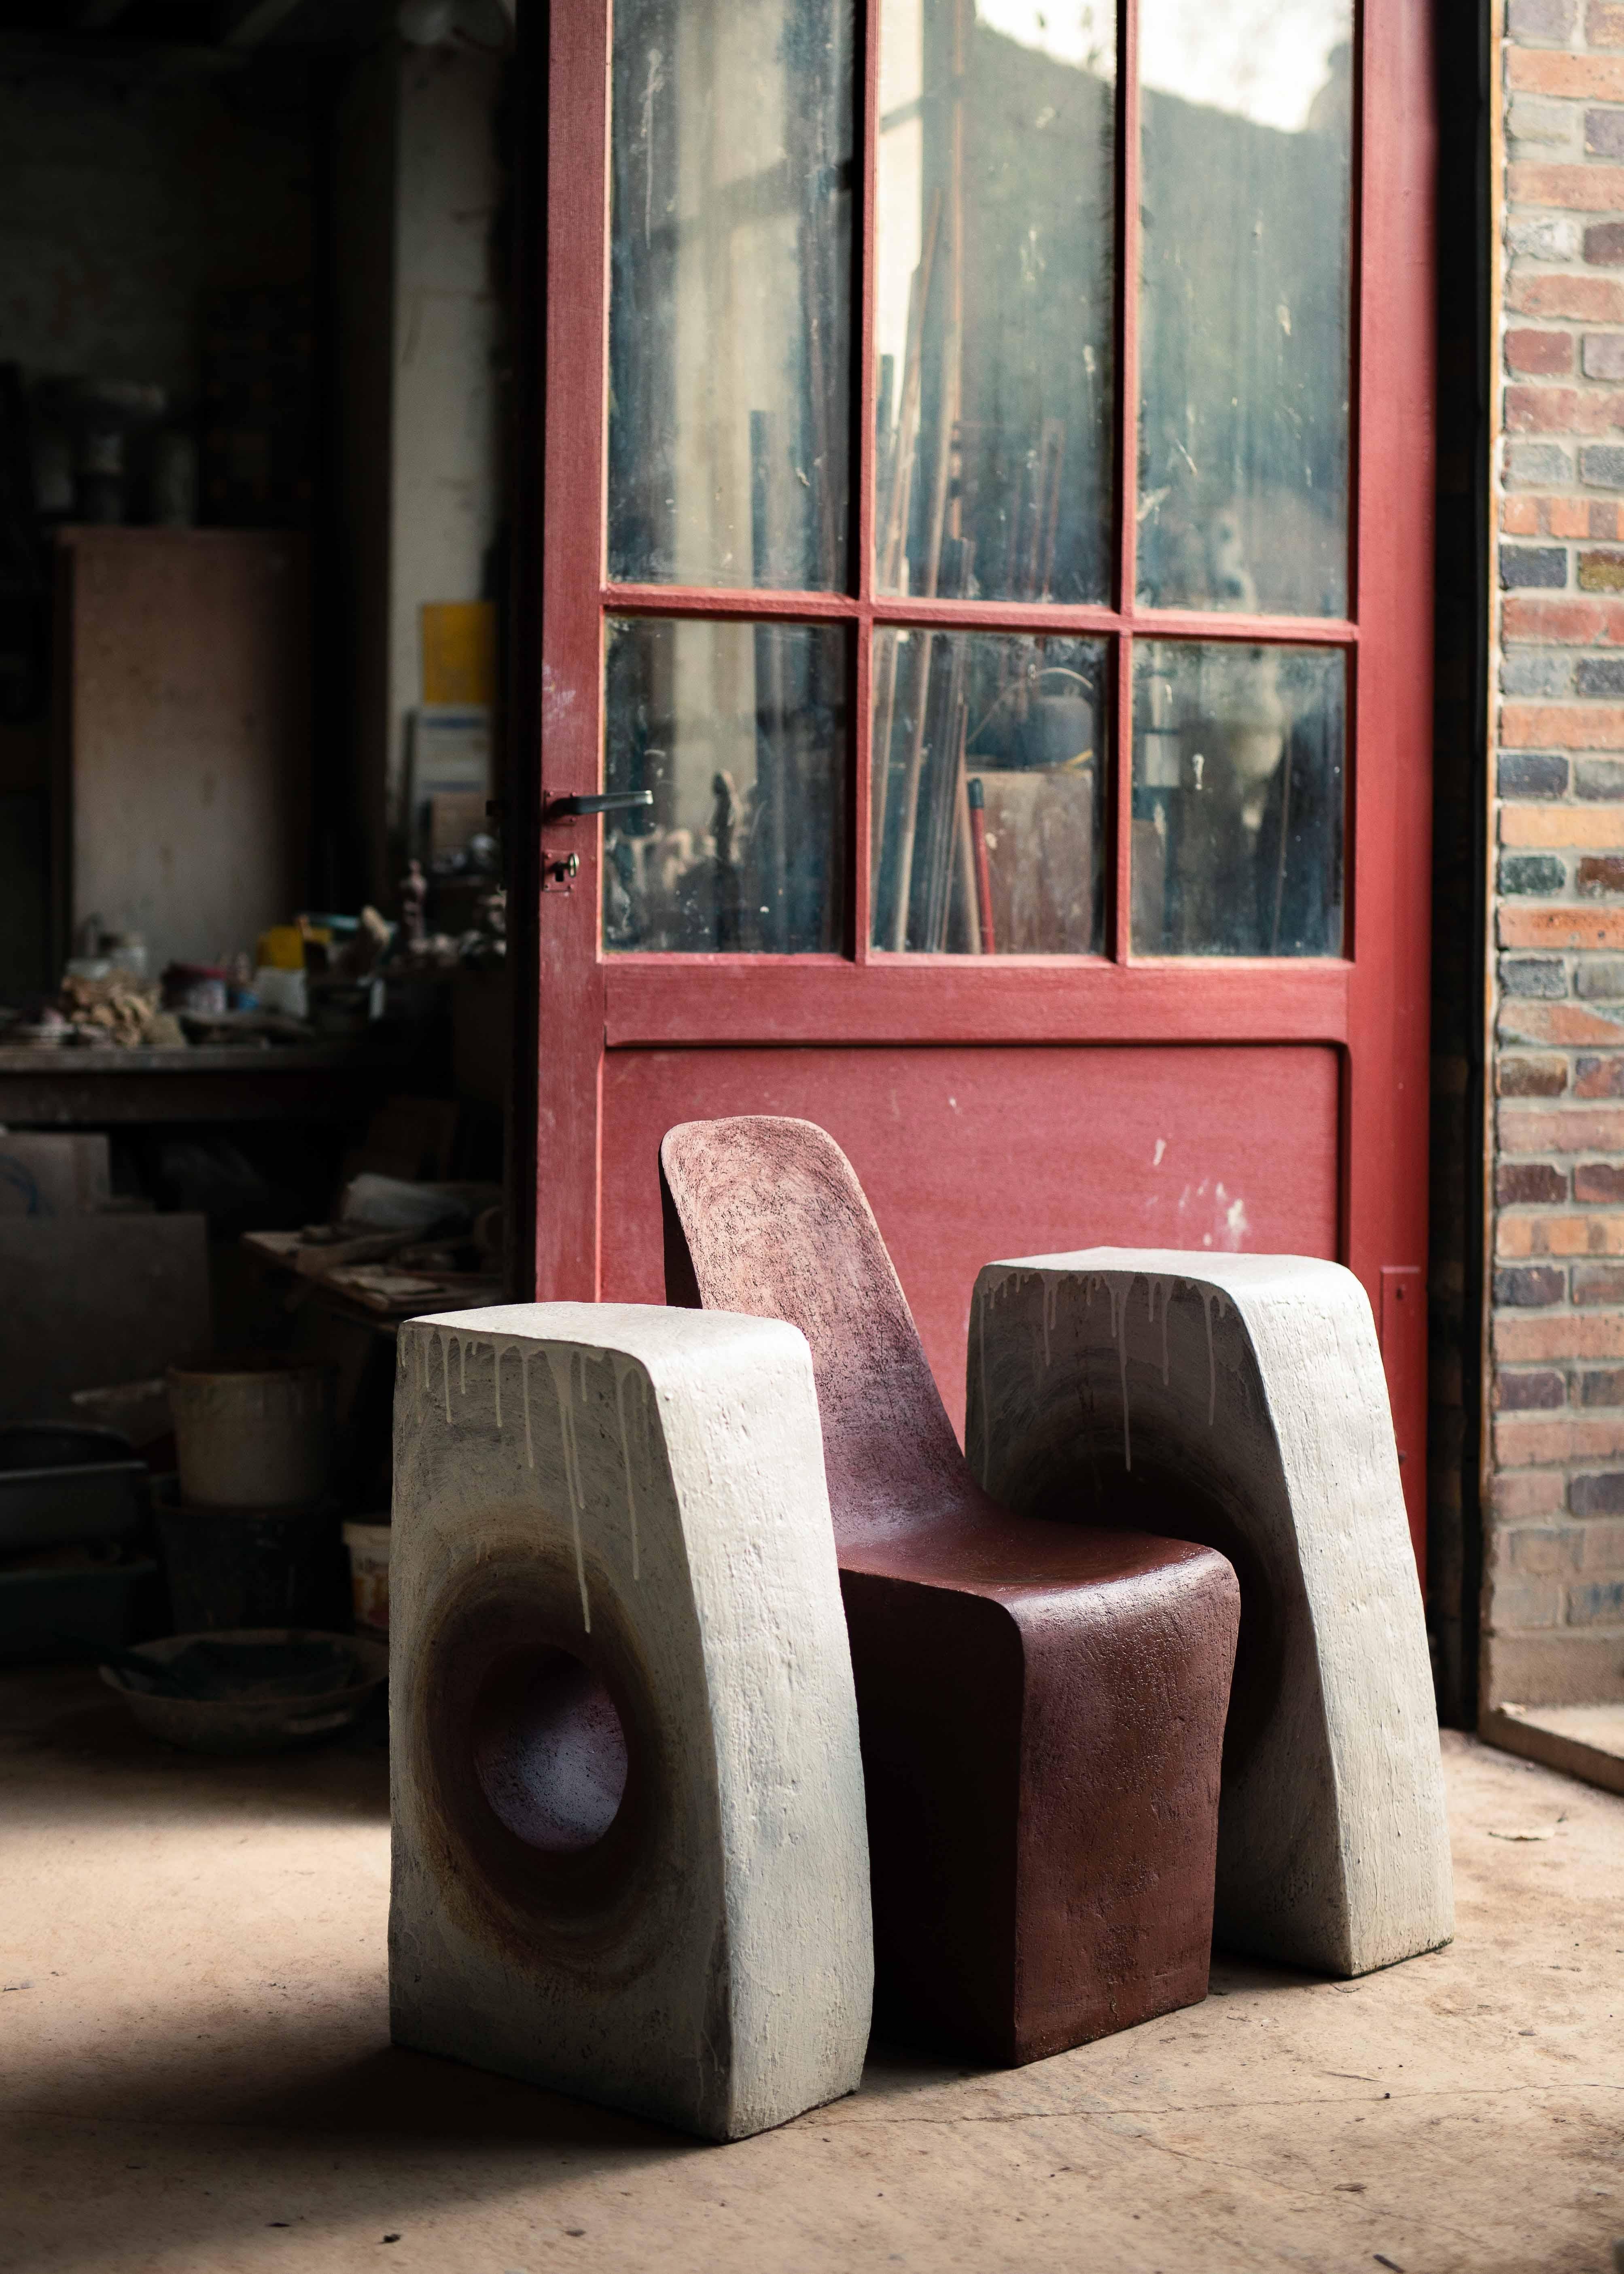 Fauteuil Aztèque by Agnès Debizet
Material: stoneware, porcelain
Dimensions: H 83 x W 110 x D 63 cm
Type: one-of-a-kind
Year: 2023

The Aztèque Armchair invites the viewer to examine the enduring fascination with the familiar and the unusual.